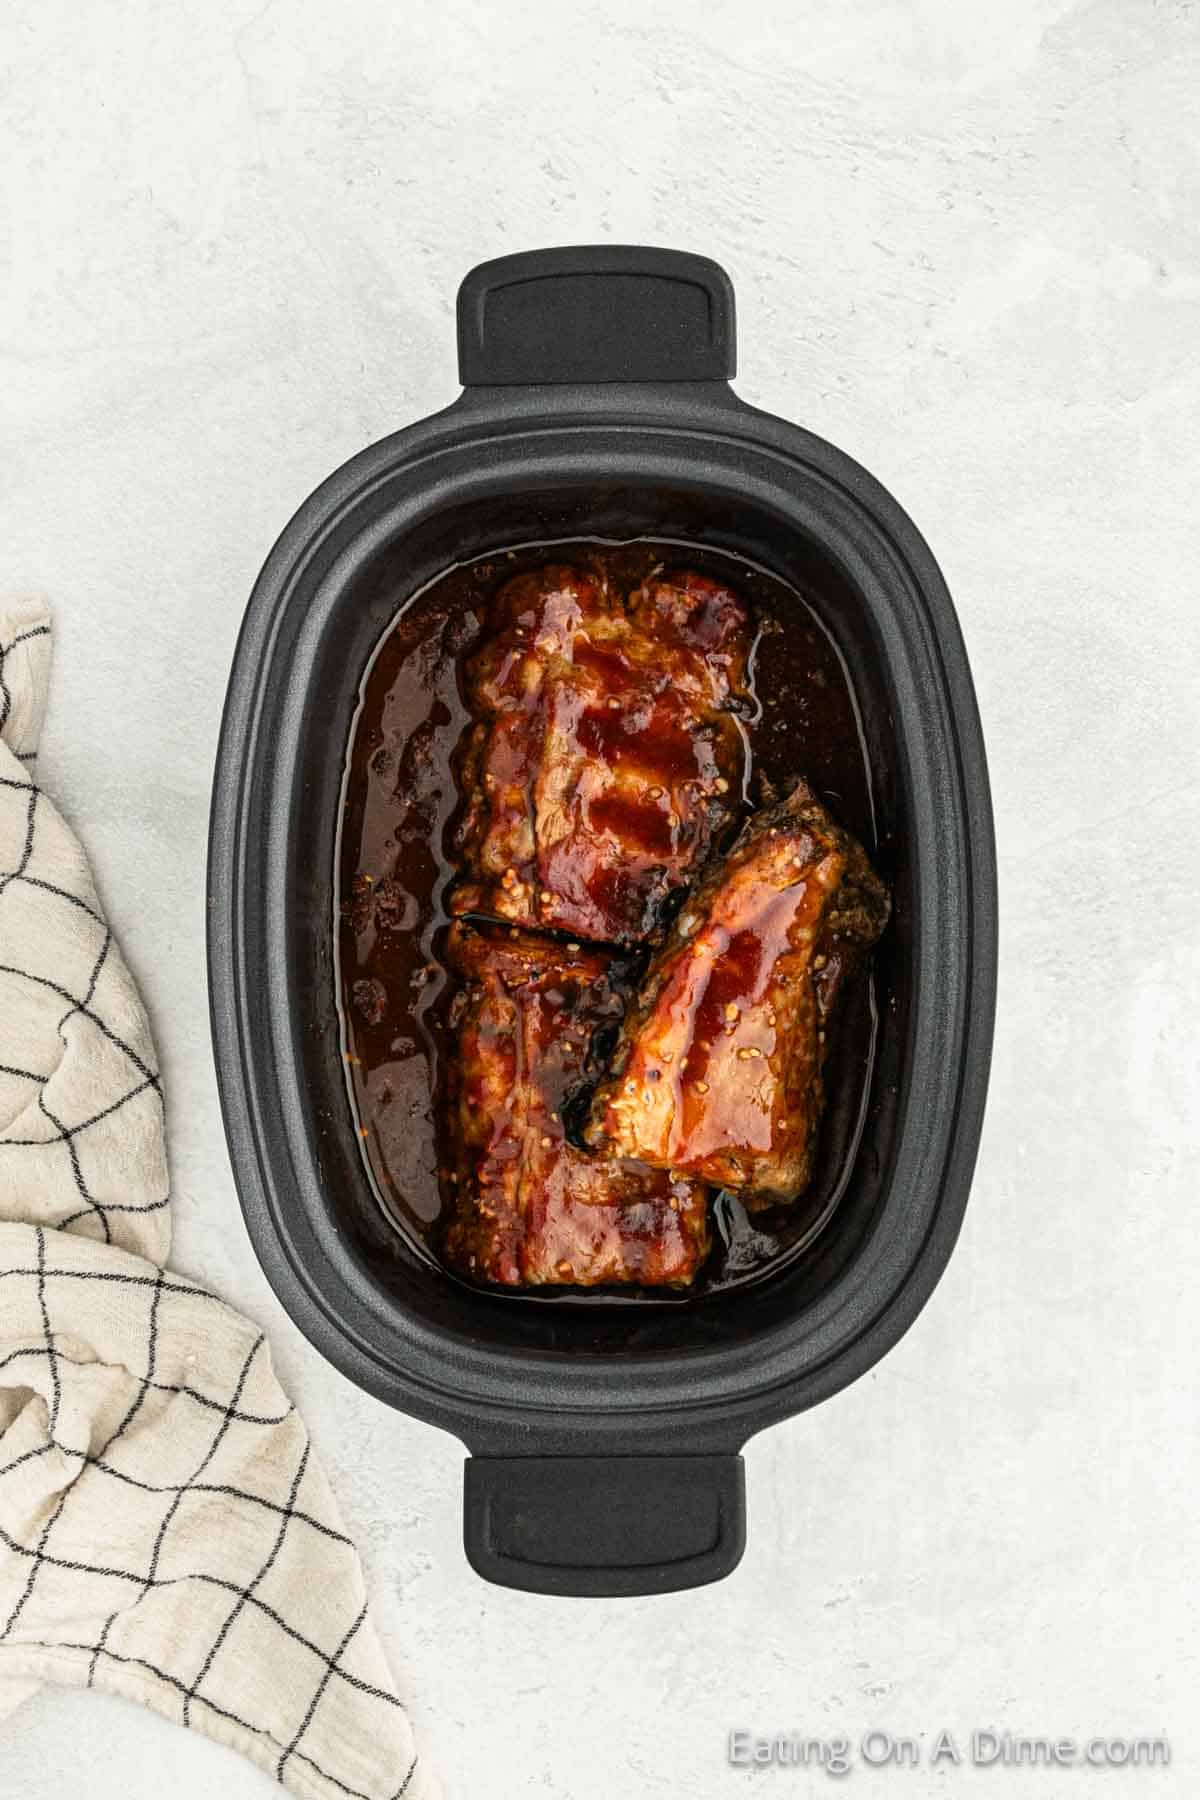 Cooked ribs in sauce in the slow cooker